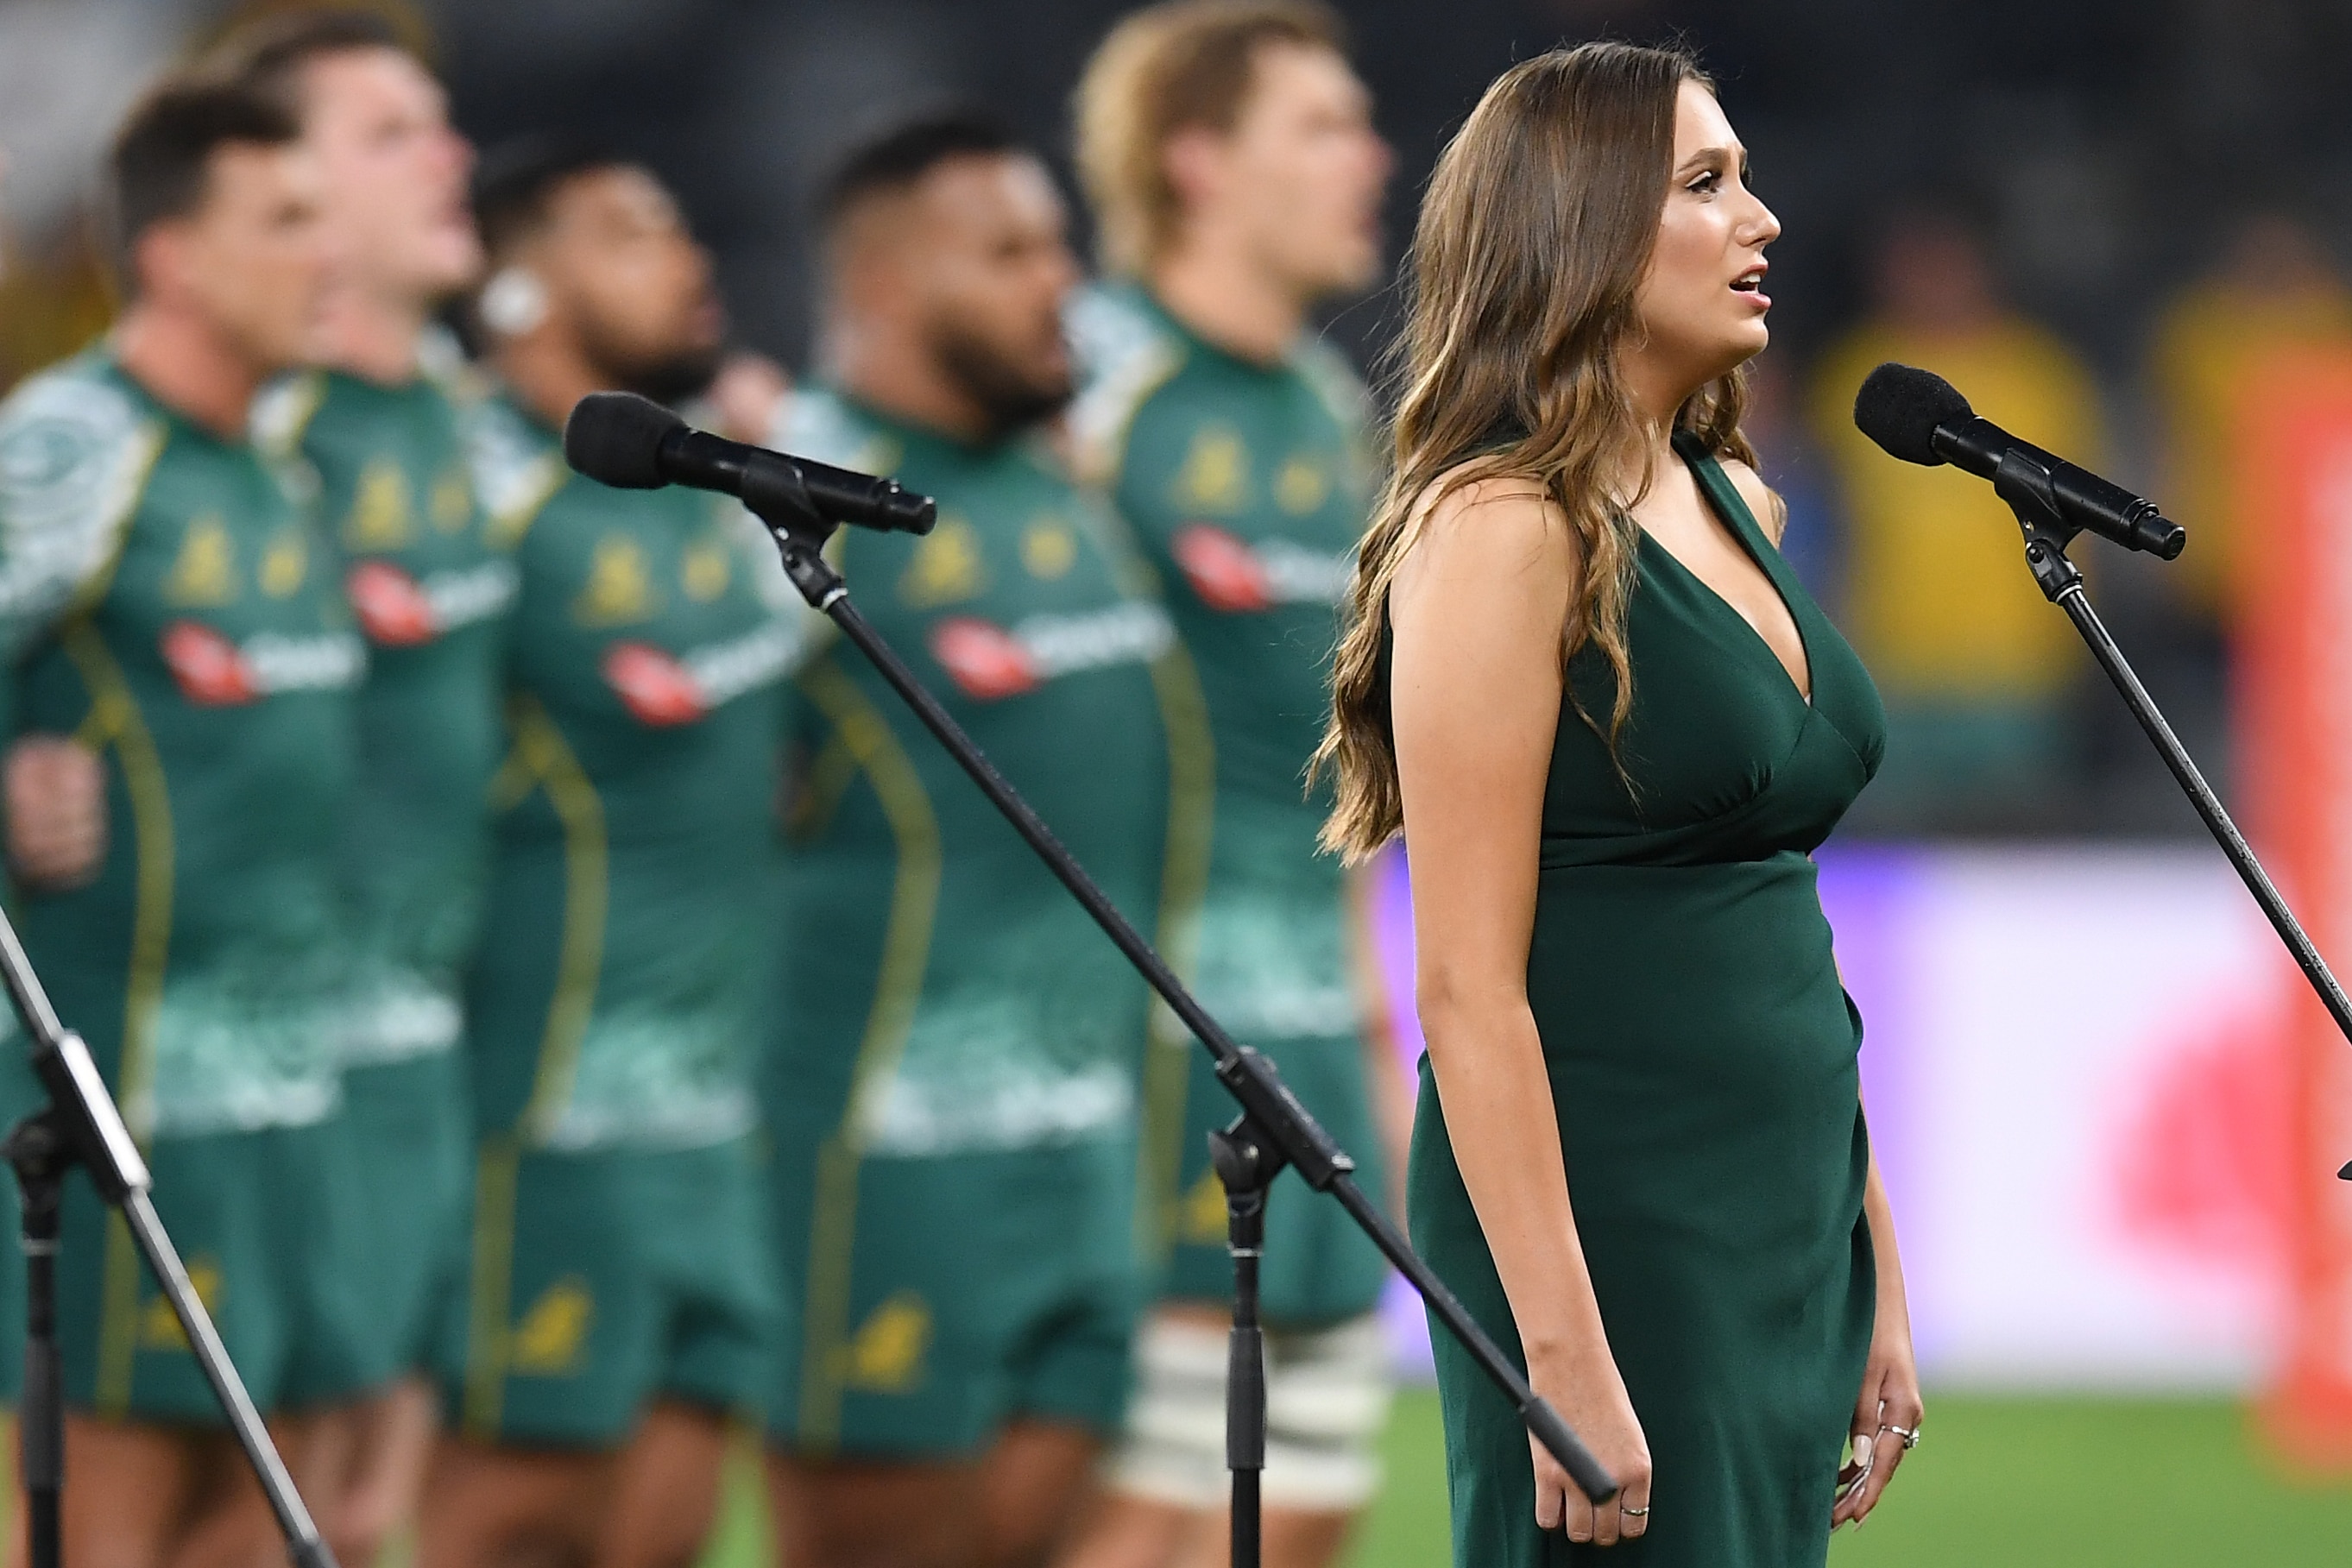 Olivia Fox sings Australia's national anthem in the Eora language during the Tri Nations rugby match between Australia and Argentina.